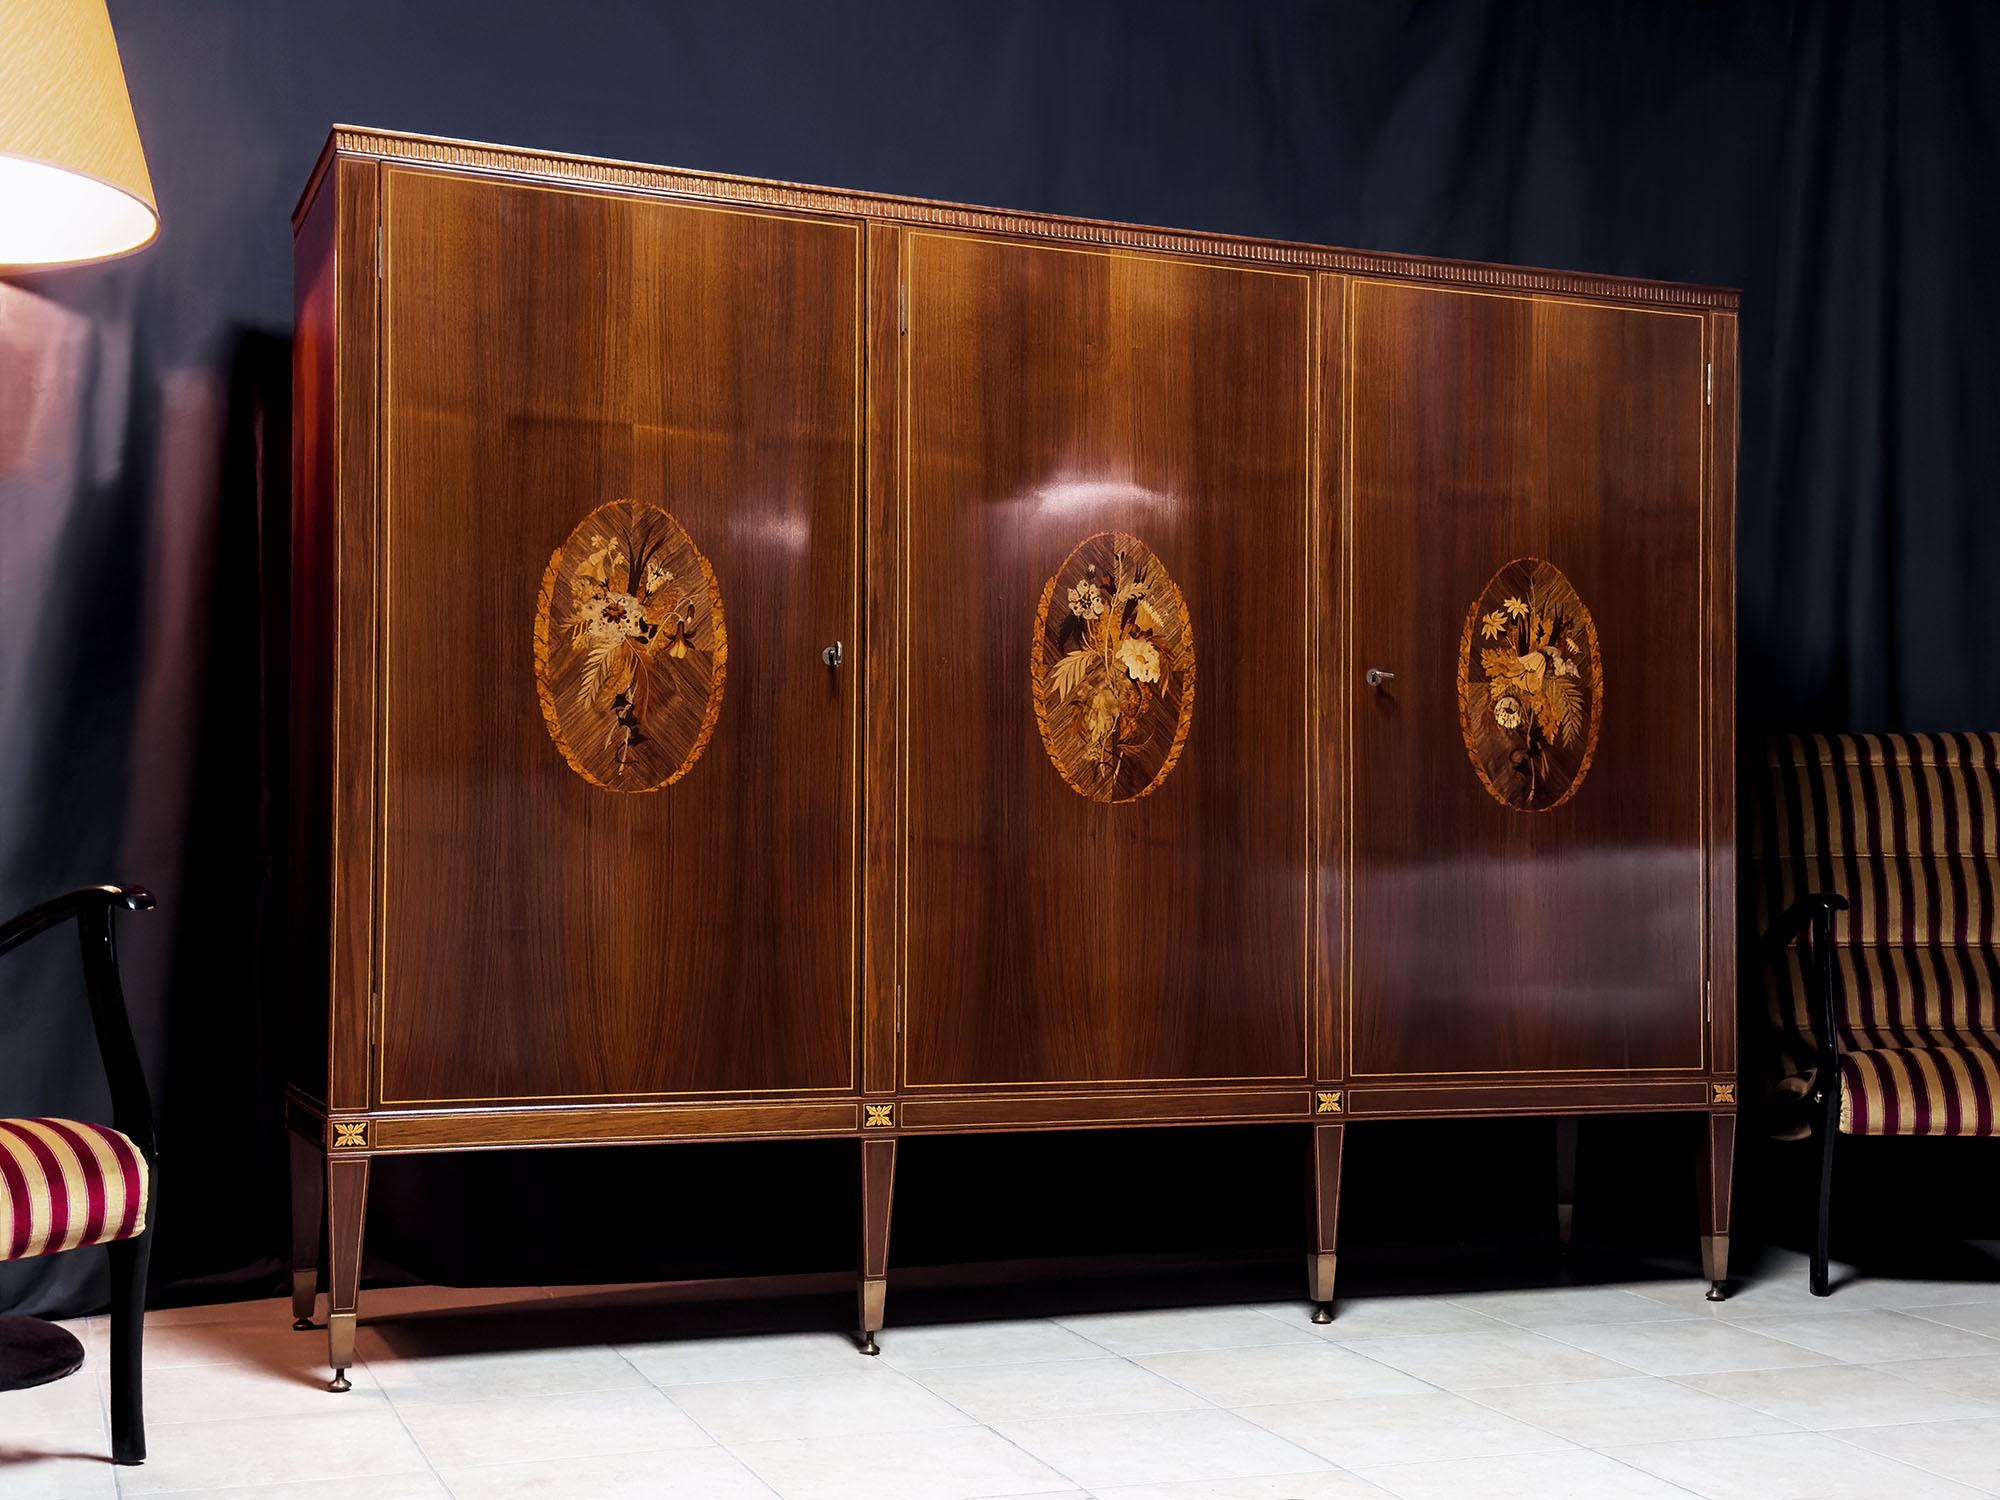 Presenting this stunning Italian sideboard with a bar compartment, crafted in the 1950s by Marelli & Colico and so well designed by professor and architect Paolo Maggi.

Its standout feature lies in the three doors adorned with breathtaking inlays